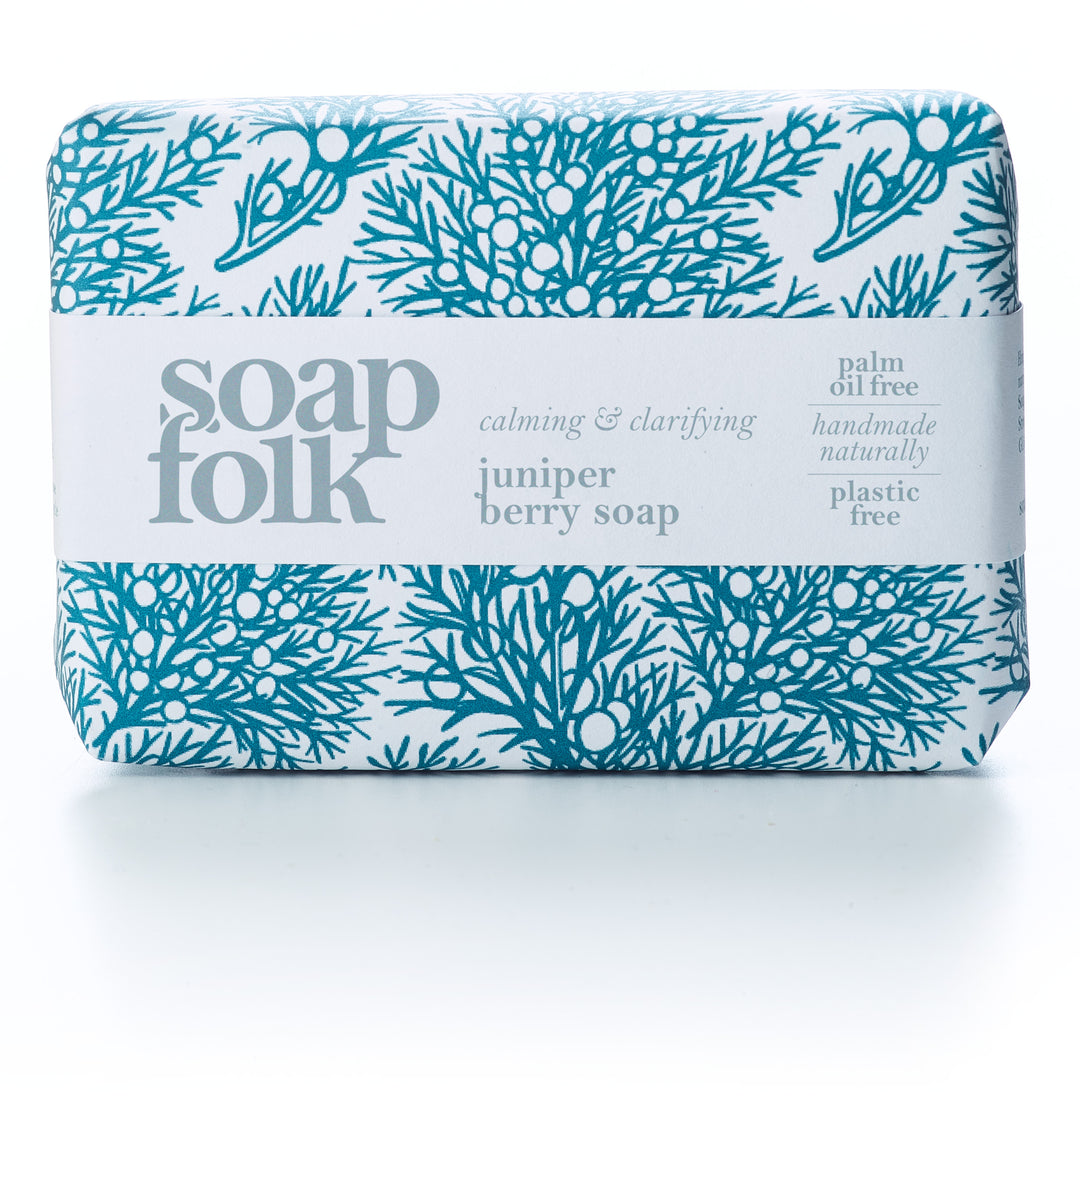 Soap Folk Juniper Berry Soap for sale at Source for the Goose 